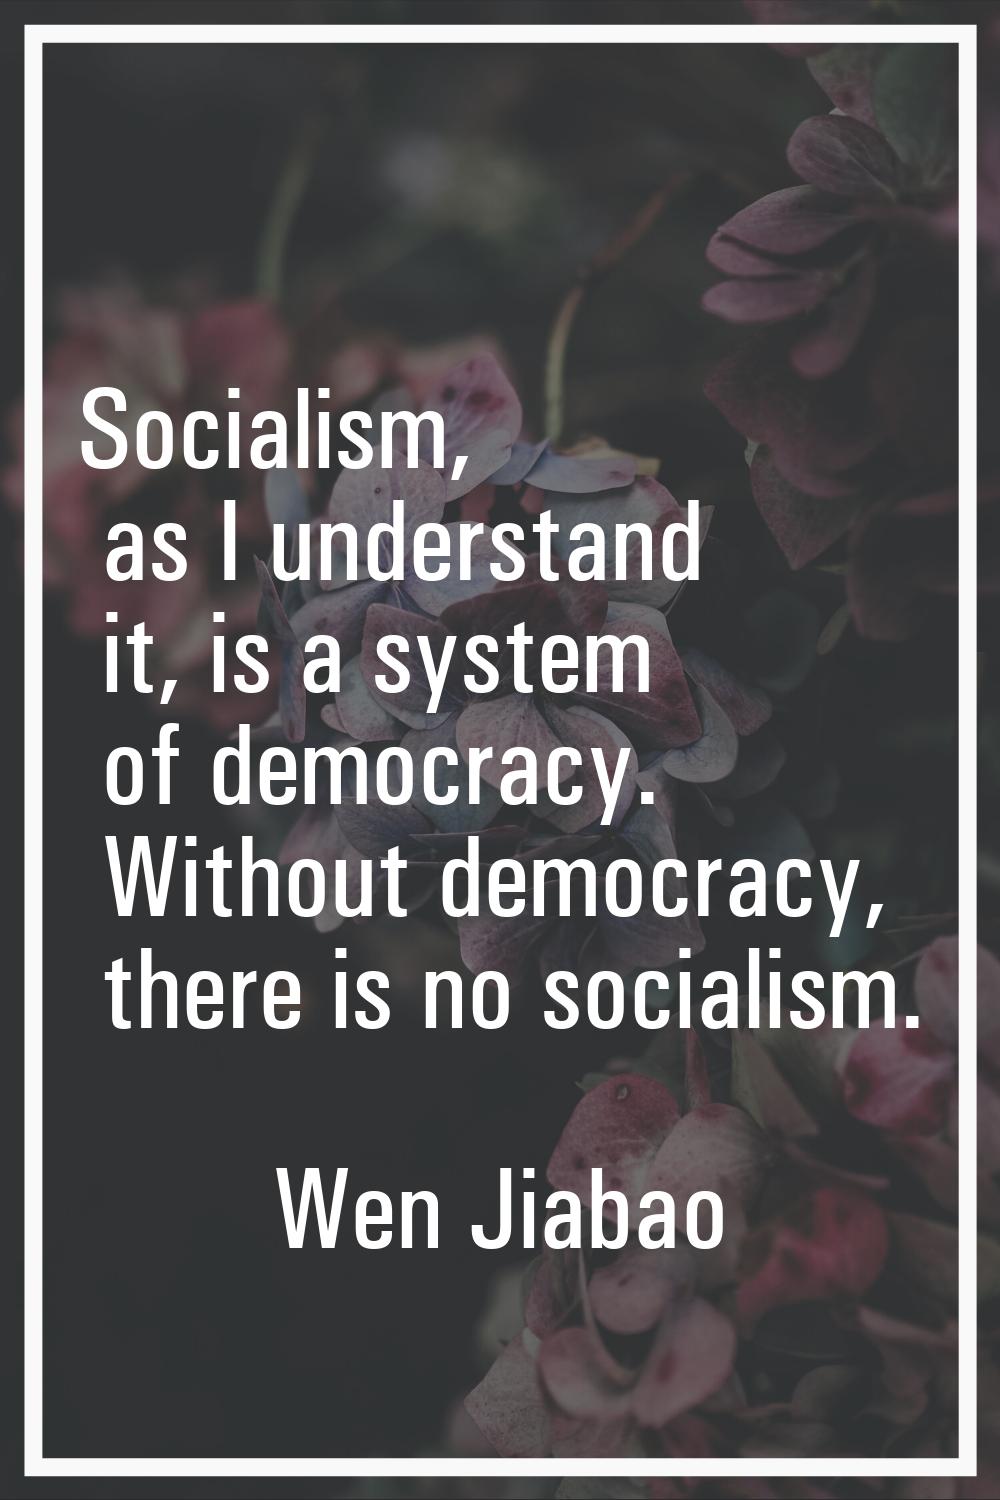 Socialism, as I understand it, is a system of democracy. Without democracy, there is no socialism.